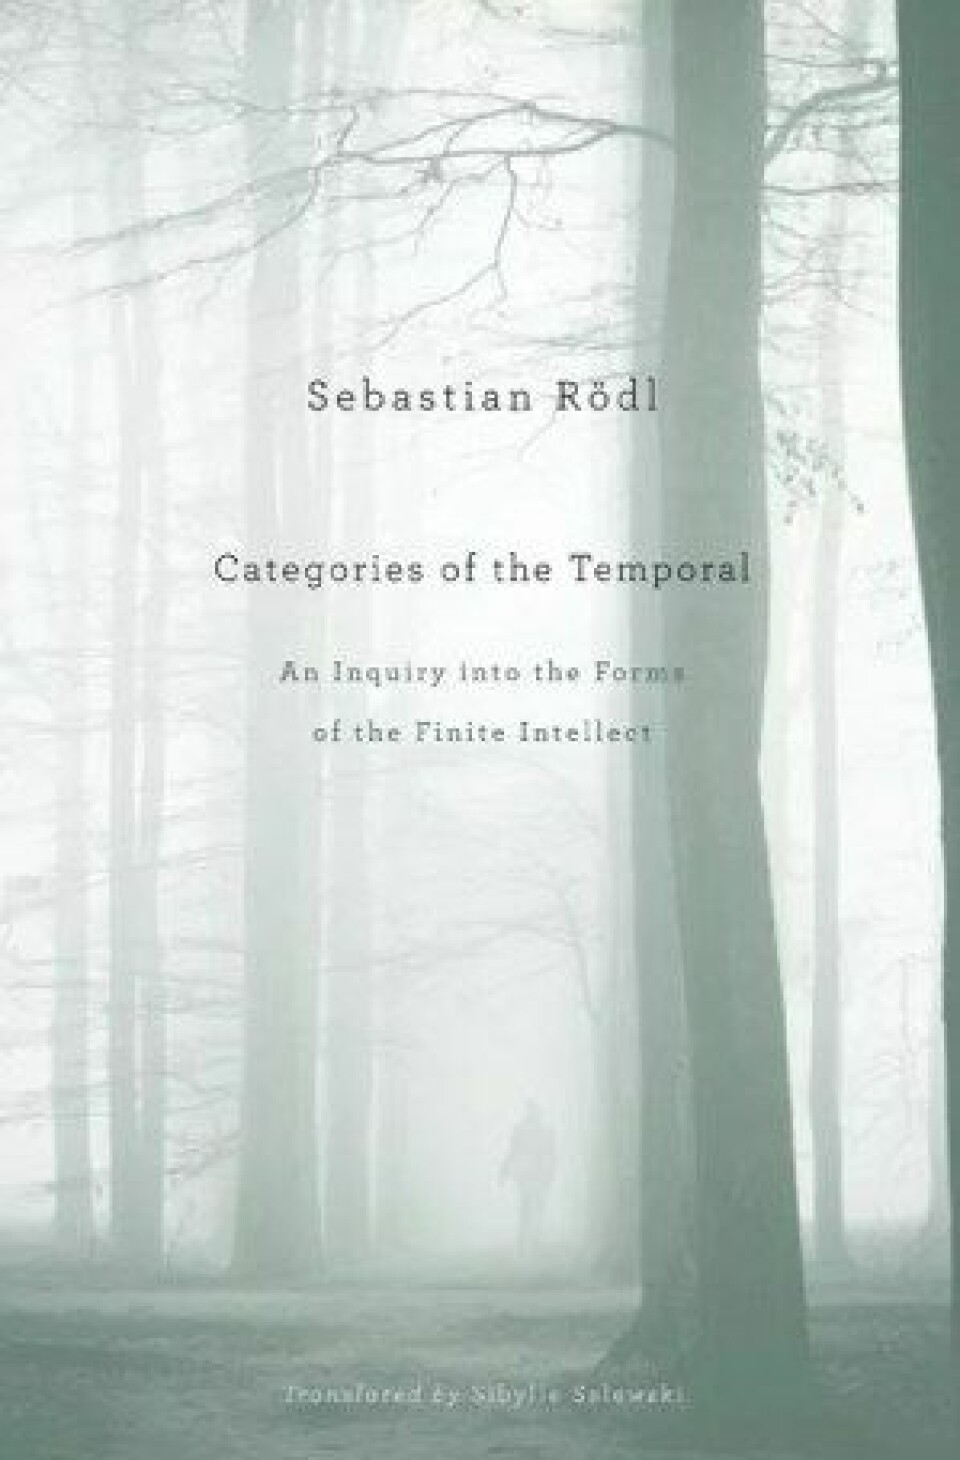 Categories of the Temporal. An Inquiry into the Forms of the Finite Intellect av Sebastian Rödl. Harvard University Press, 2012.